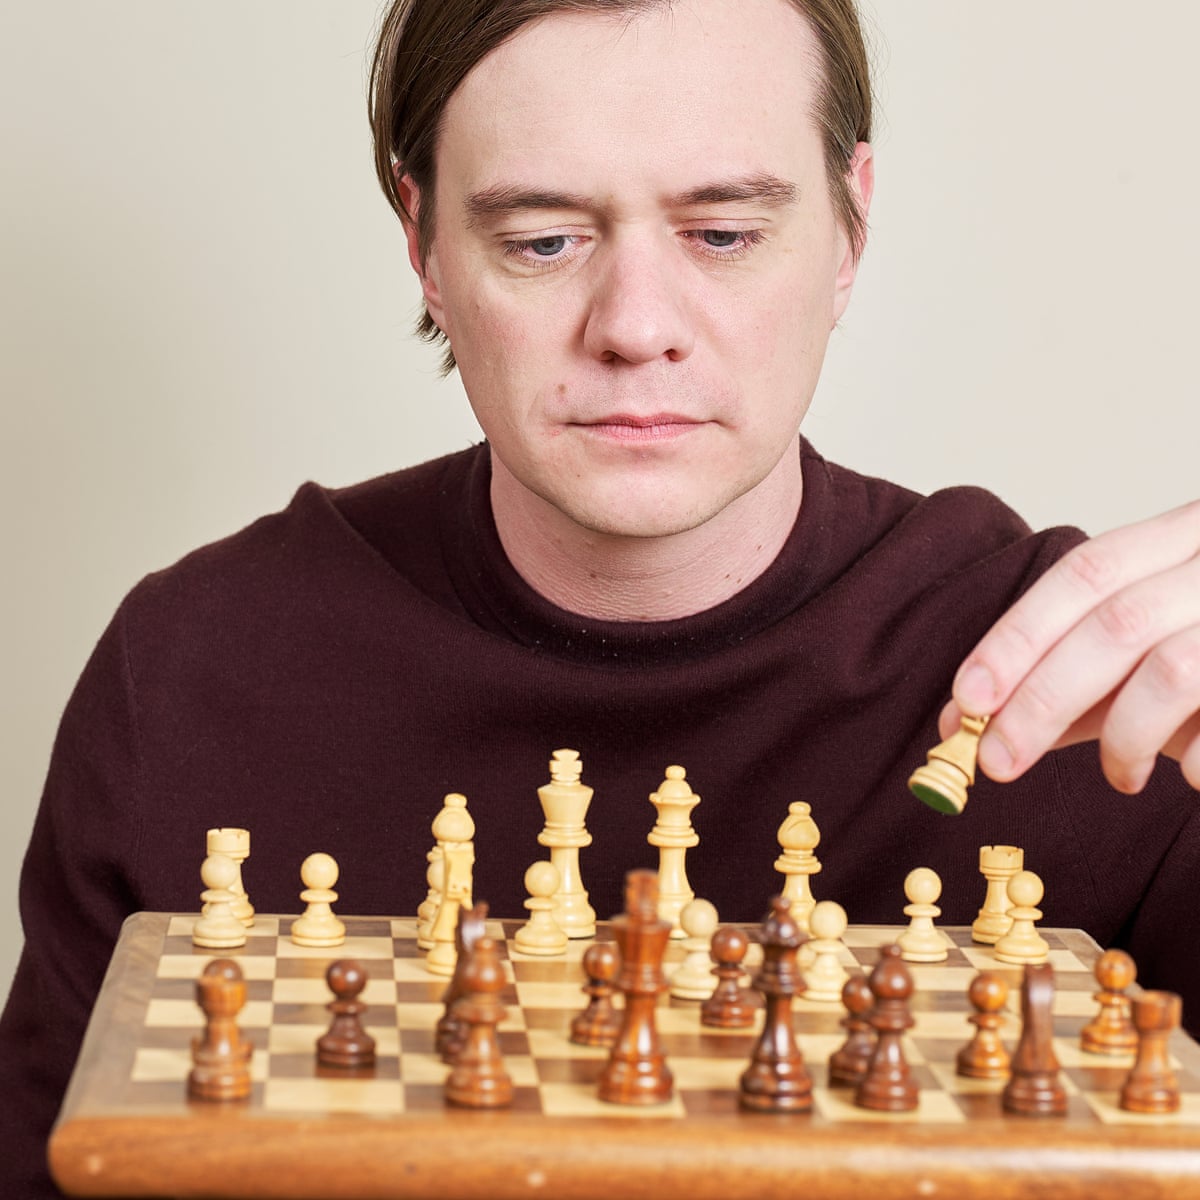 Check mates: how chess saved my mental wellbeing, Chess